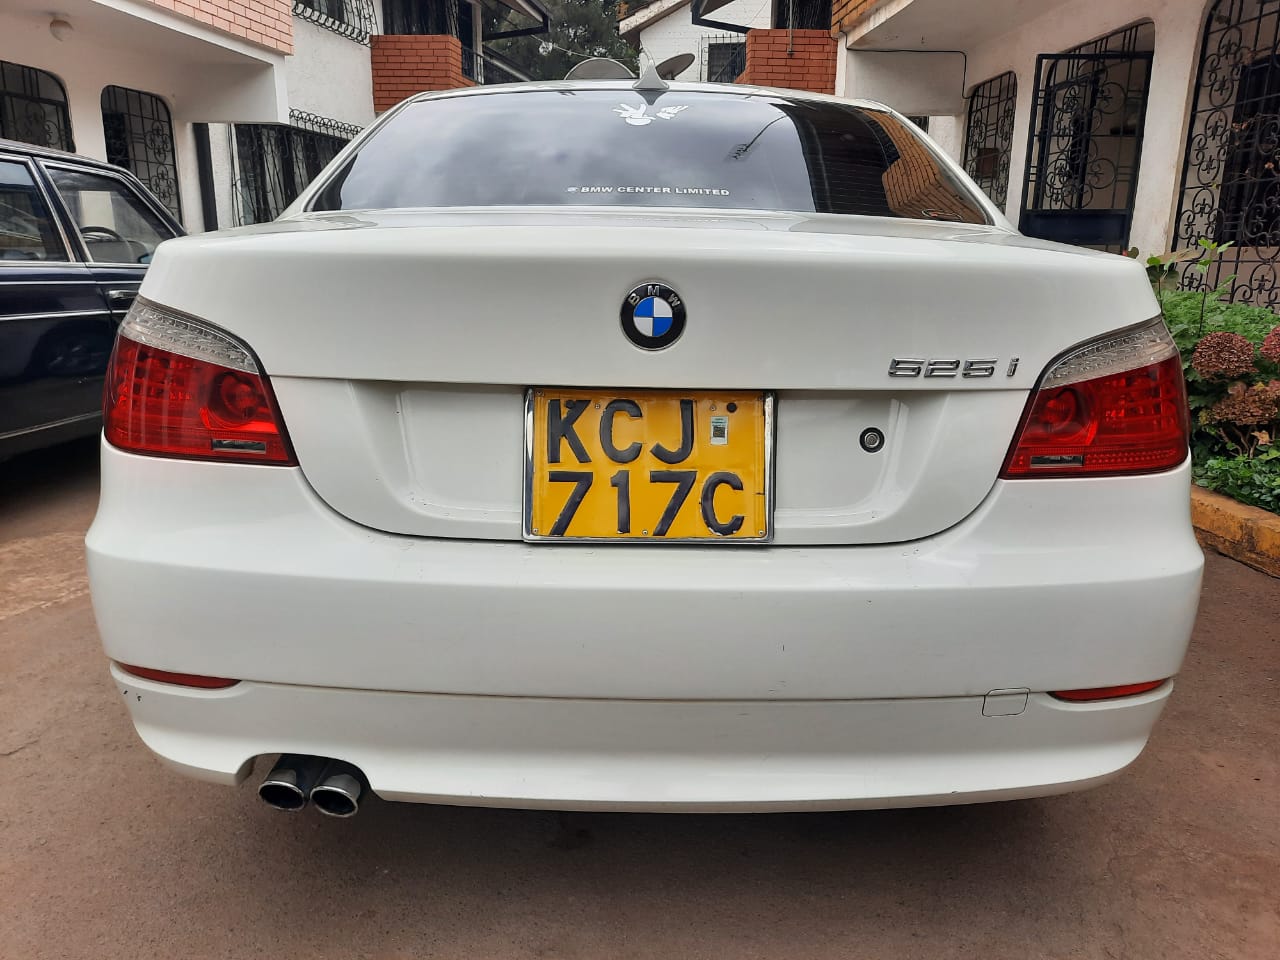 Bmw 525i CHEAPEST You Pay 40% deposit Trade in Ok